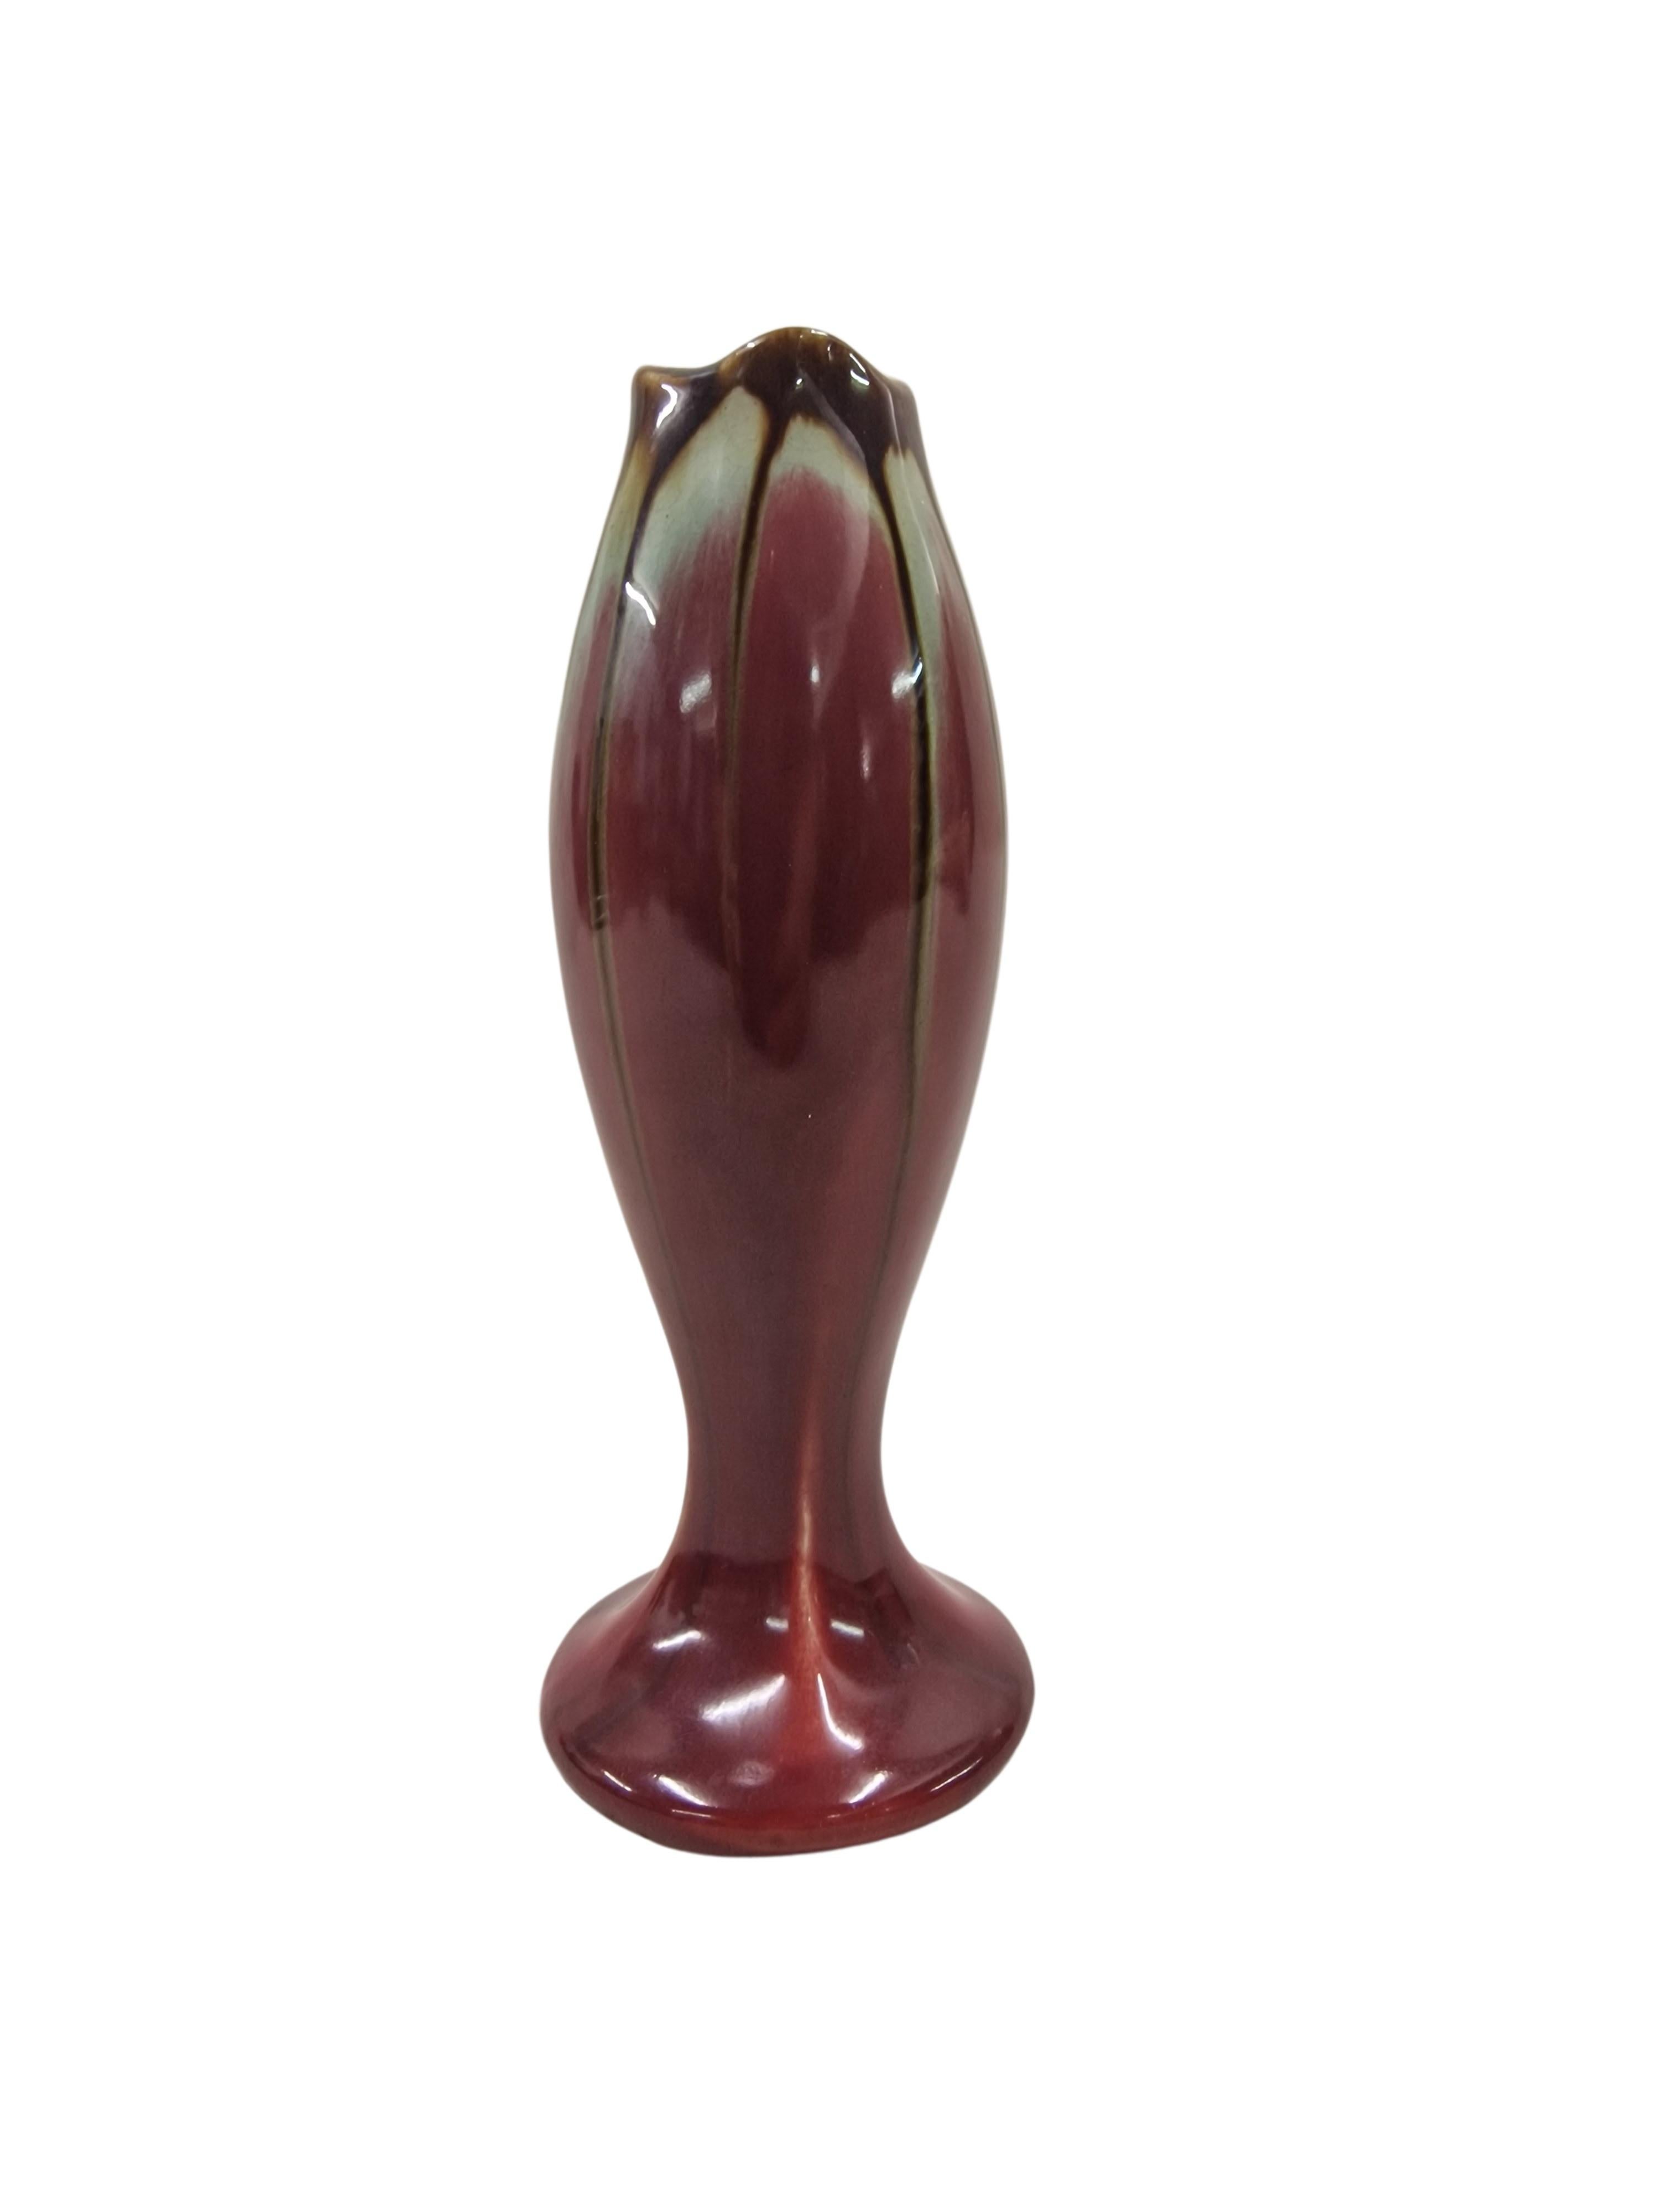 Stunning flower vase of the famous manufacturer Thulin from Belgium, made in the 1930s. 

The vase is elaborately designed in form as in colourfulness. The round base rises into a raised, bulbous shape, with curves in the upper outlet.

The vase has